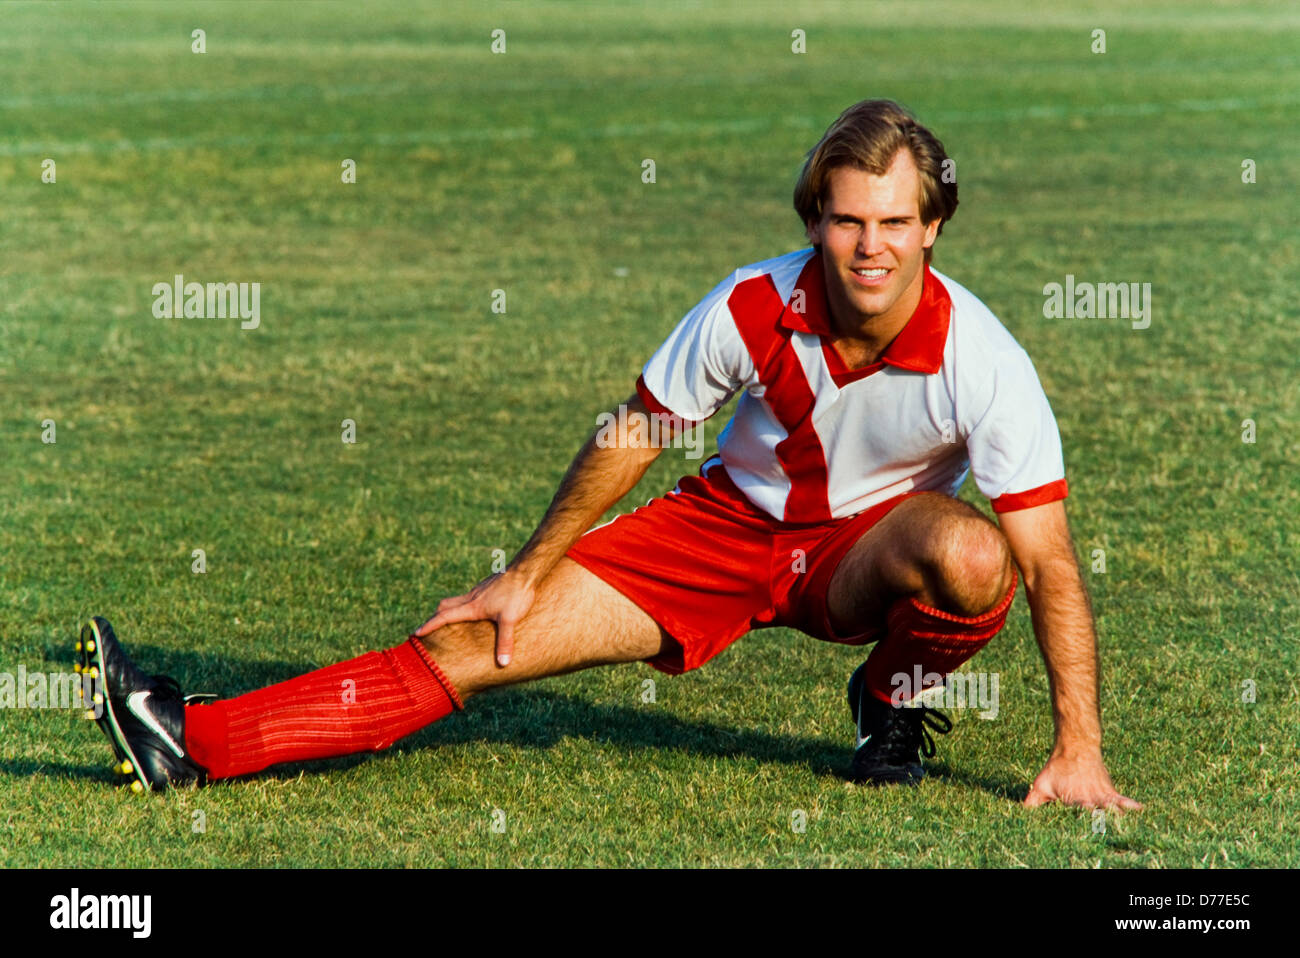 Man in soccer uniform stretching before game, Miami Stock Photo